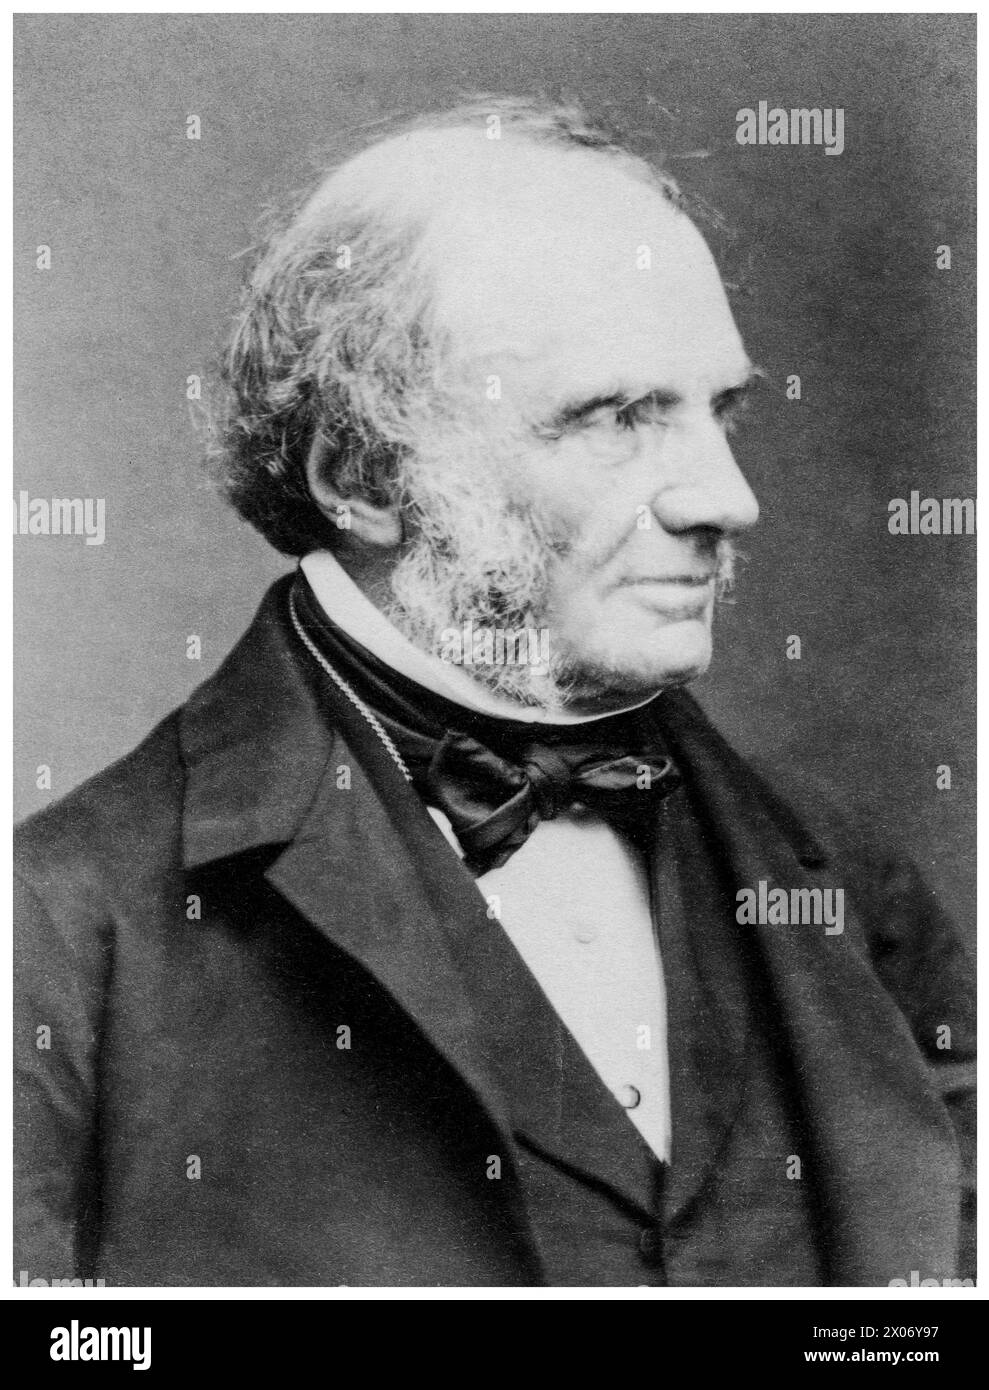 John Russell, 1st Earl Russell (1792-1878), known as 'Lord John Russell', twice Prime Minister of the United Kingdom 1846-1852 and 1865-1866, portrait photograph carte de visite by John Jabez Edwin Mayall, 1861 Stock Photo